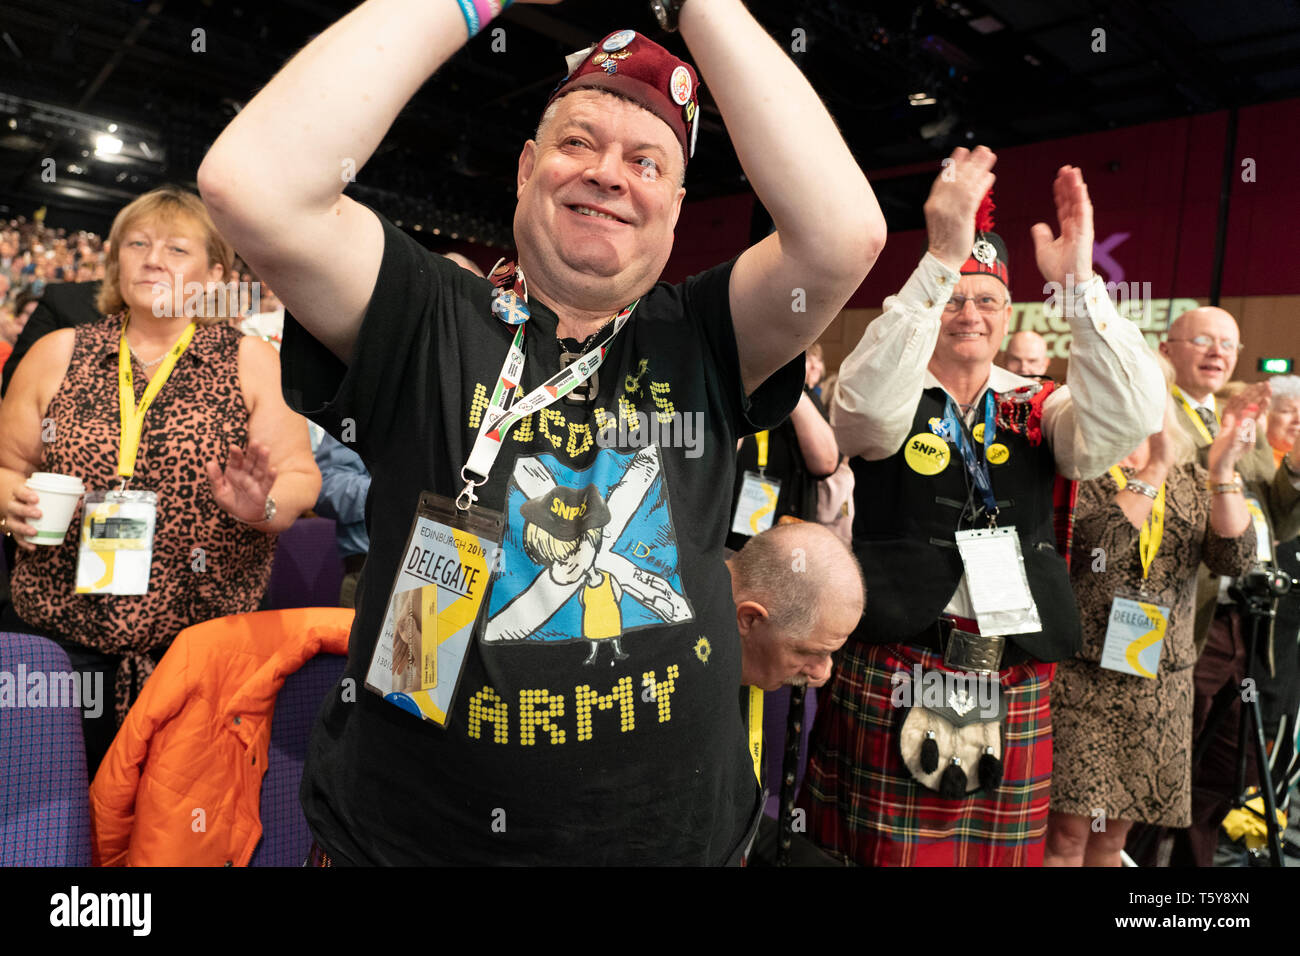 Edinburgh, Scotland, UK. 27 April, 2019. SNP ( Scottish National Party) Spring Conference takes place at the EICC ( Edinburgh International Conference Centre) in Edinburgh. Pictured; Delegates in tartan enjoying proceedings of the conference on day one. Credit: Iain Masterton/Alamy Live News Stock Photo